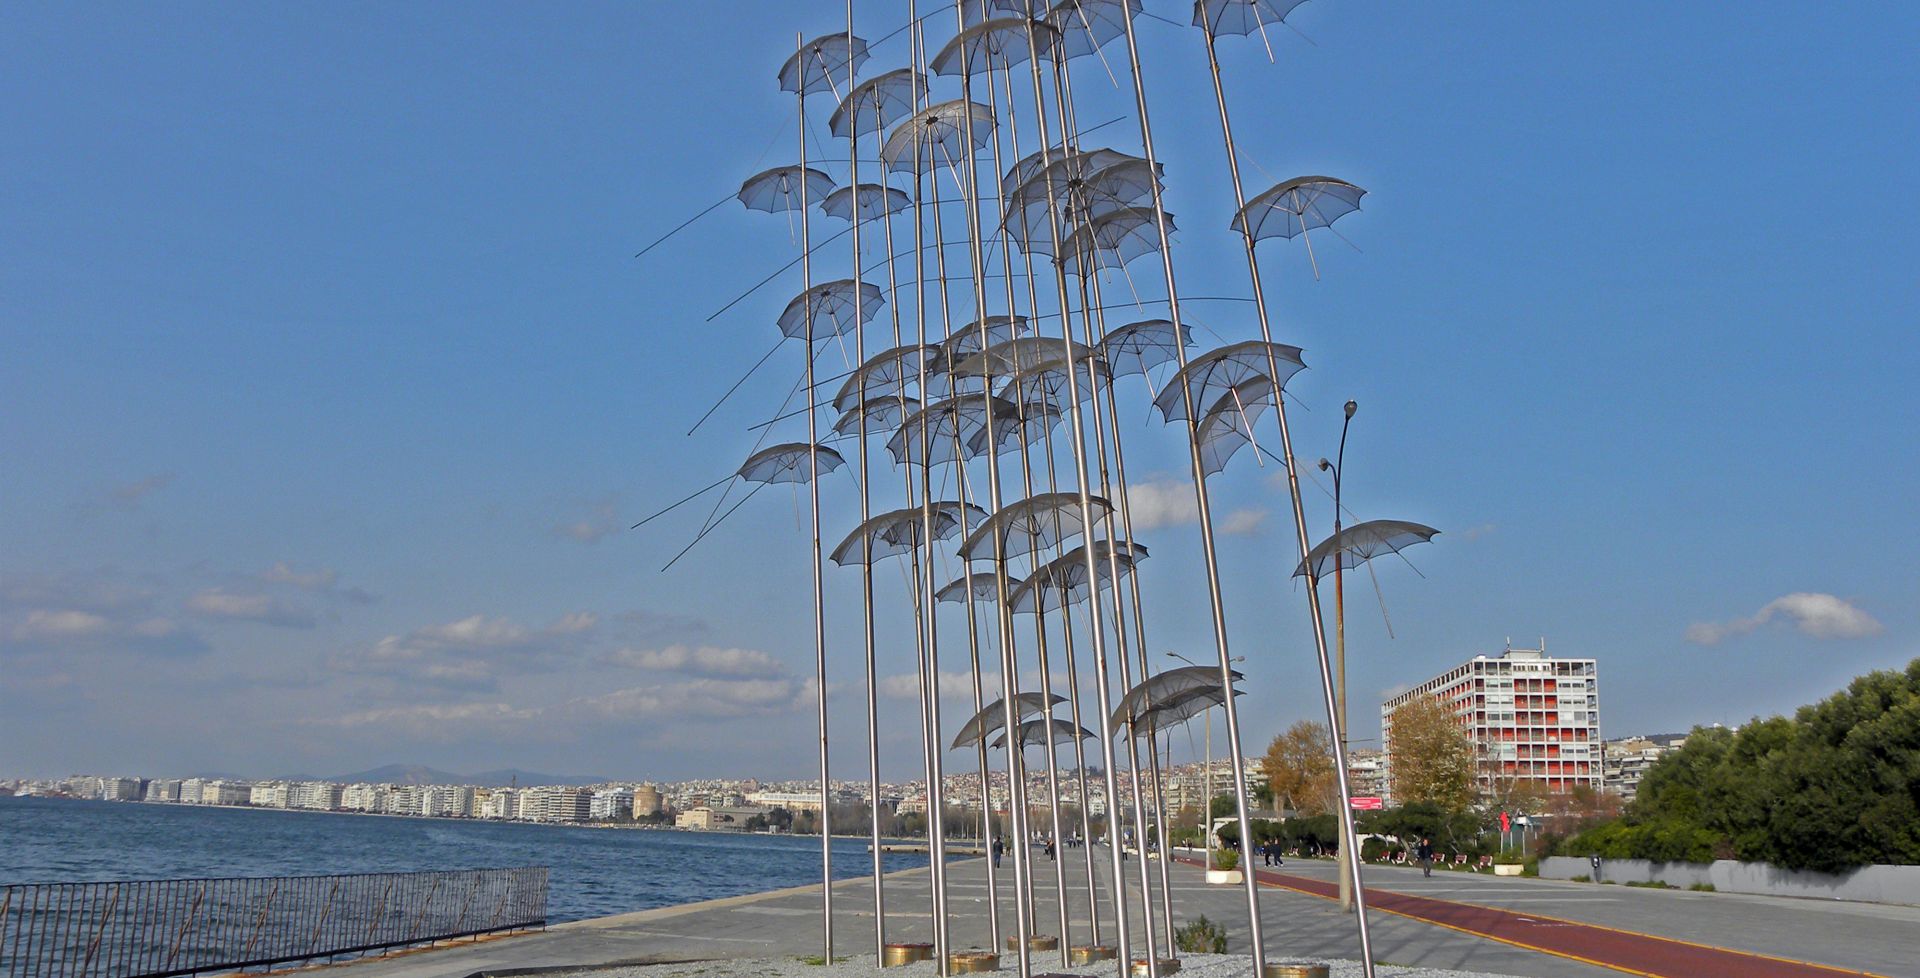 view of the seaside at Thessaloniki, Greece with statue of flying umbrellas